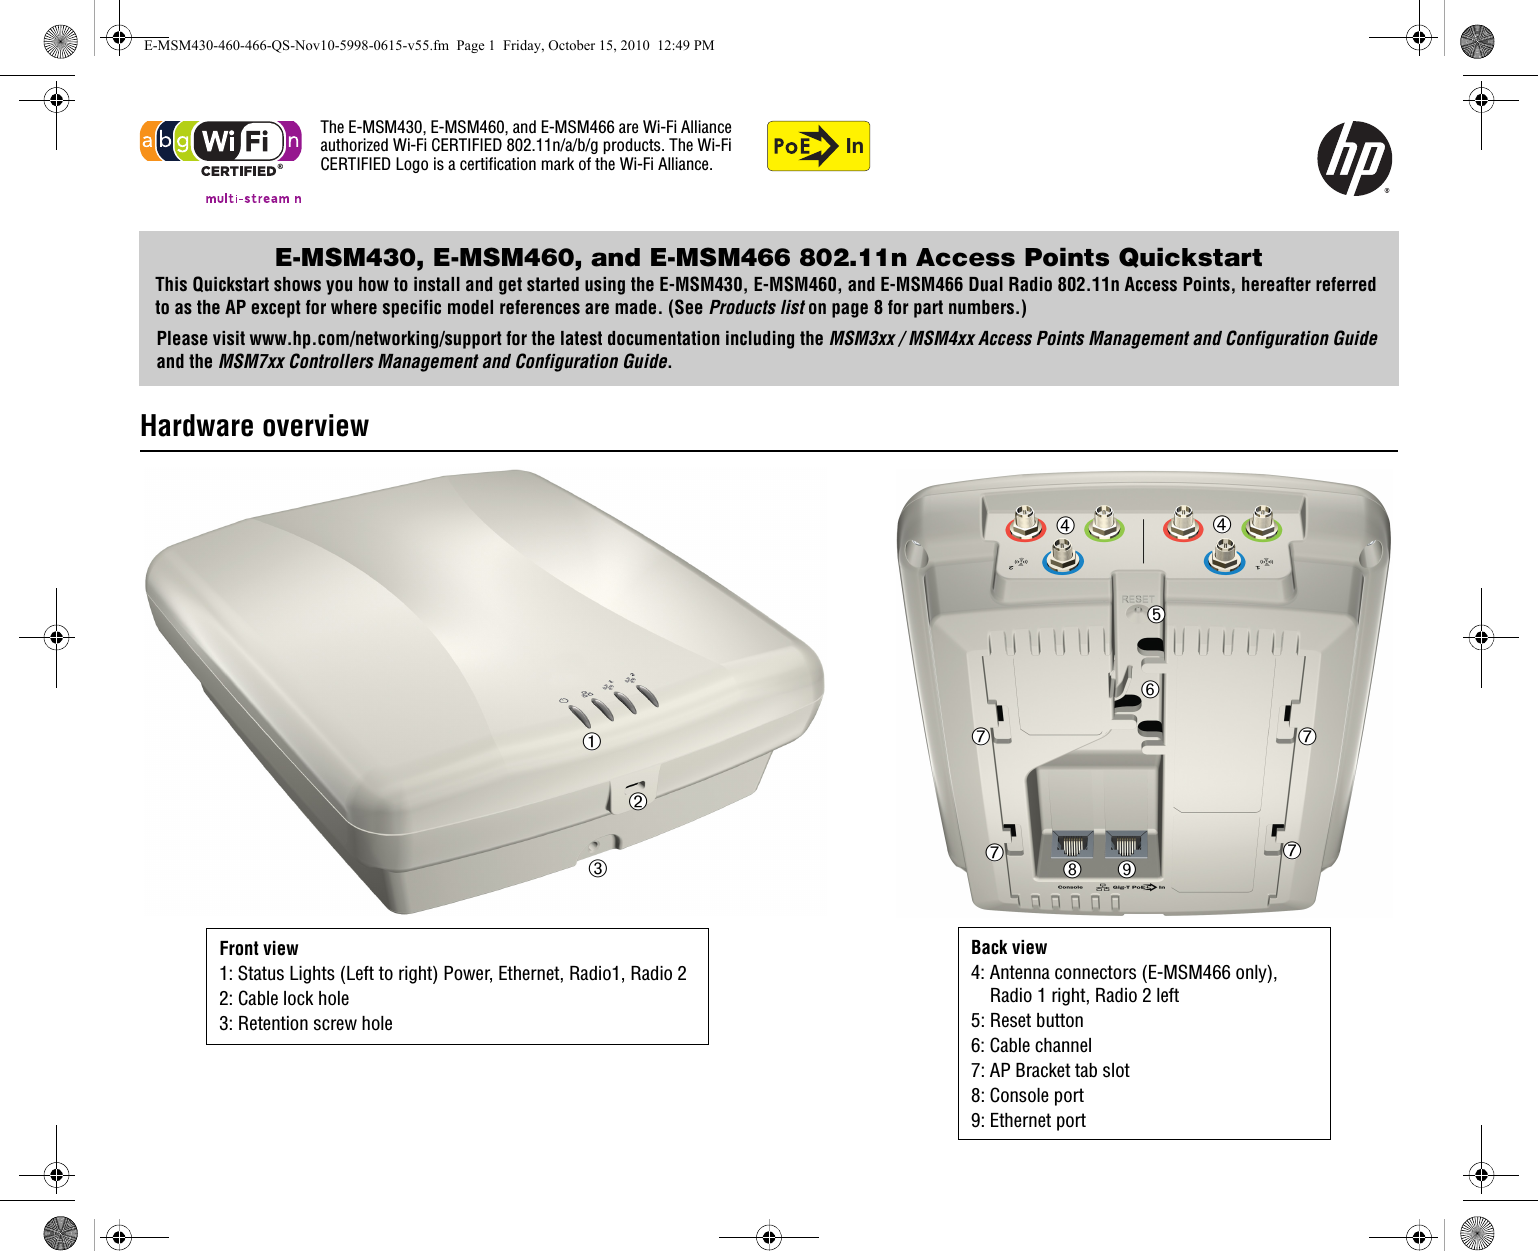 InThe E-MSM430, E-MSM460, and E-MSM466 are Wi-Fi Alliance authorized Wi-Fi CERTIFIED 802.11n/a/b/g products. The Wi-Fi CERTIFIED Logo is a certification mark of the Wi-Fi Alliance.E-MSM430, E-MSM460, and E-MSM466 802.11n Access Points QuickstartThis Quickstart shows you how to install and get started using the E-MSM430, E-MSM460, and E-MSM466 Dual Radio 802.11n Access Points, hereafter referred to as the AP except for where specific model references are made. (See Products list on page 8 for part numbers.)Please visit www.hp.com/networking/support for the latest documentation including the MSM3xx / MSM4xx Access Points Management and Configuration Guide and the MSM7xx Controllers Management and Configuration Guide.Hardware overview ➀➁➅➇➈➆➆➆➆➃➄➃➂Front view 1: Status Lights (Left to right) Power, Ethernet, Radio1, Radio 22: Cable lock hole3: Retention screw holeBack view4: Antenna connectors (E-MSM466 only), Radio 1 right, Radio 2 left5: Reset button6: Cable channel7: AP Bracket tab slot8: Console port9: Ethernet portE-MSM430-460-466-QS-Nov10-5998-0615-v55.fm  Page 1  Friday, October 15, 2010  12:49 PM